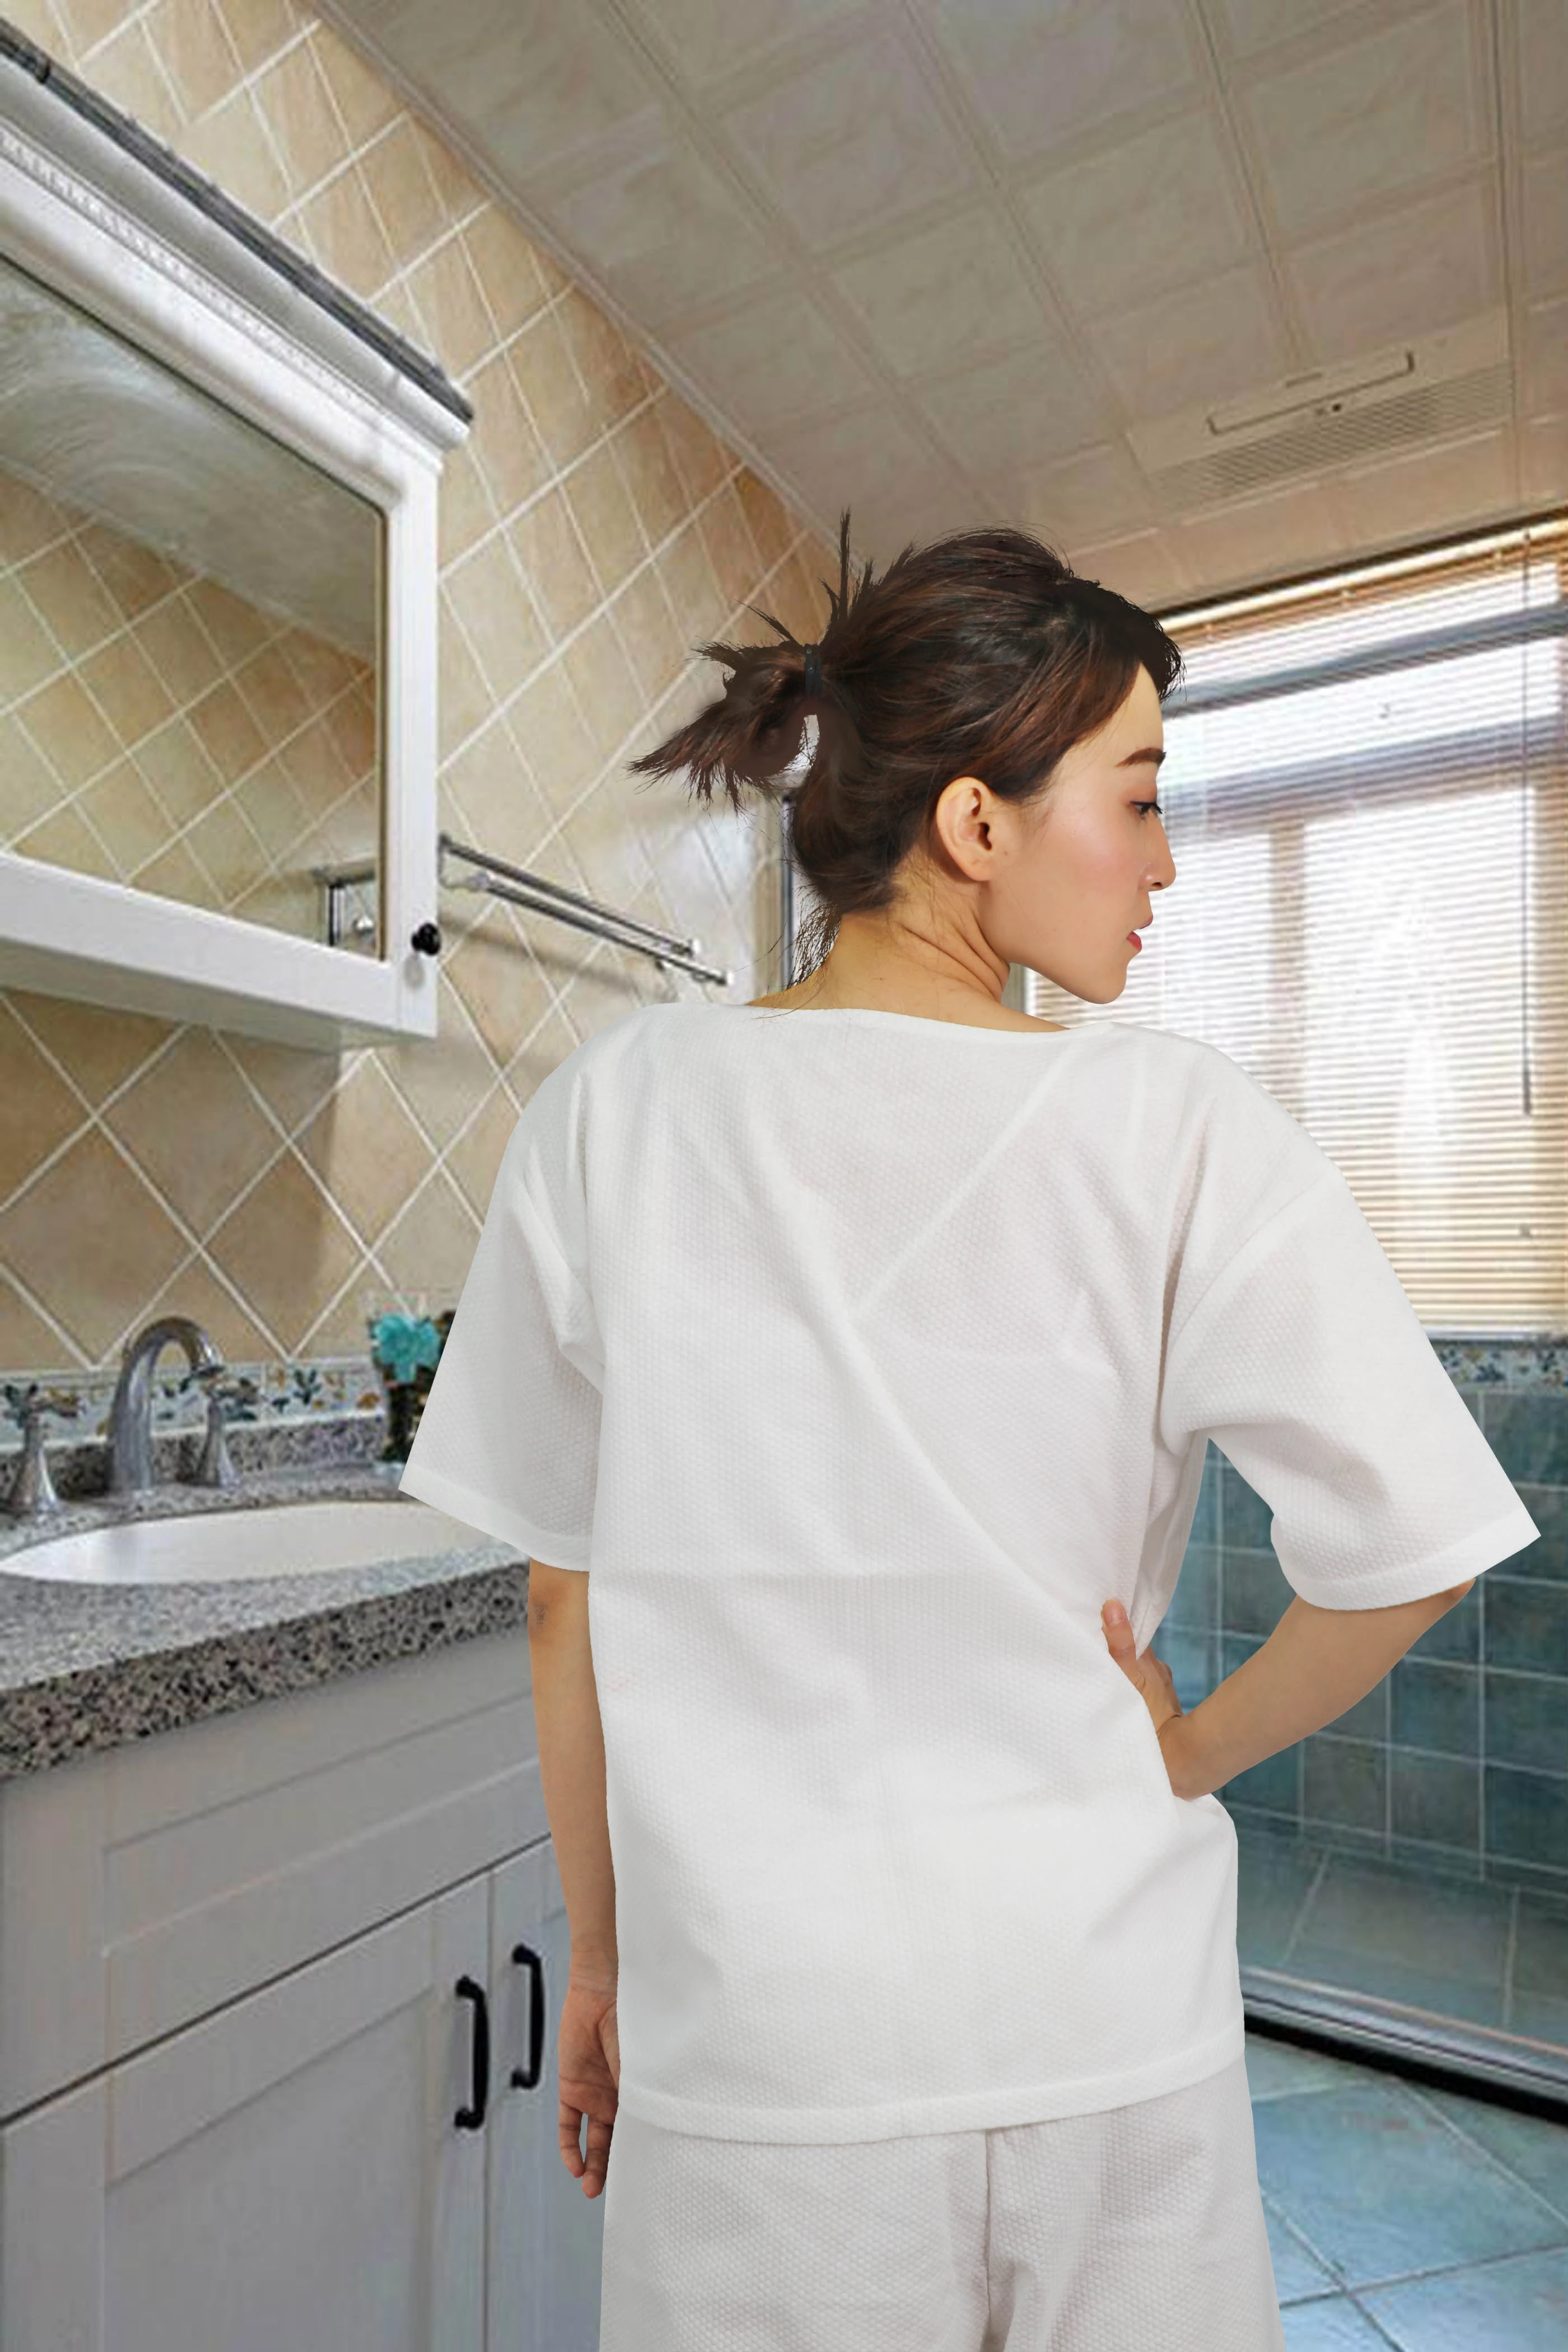 Disposable non-woven unsex private logo high quality customized biodegradable breathable bath robe